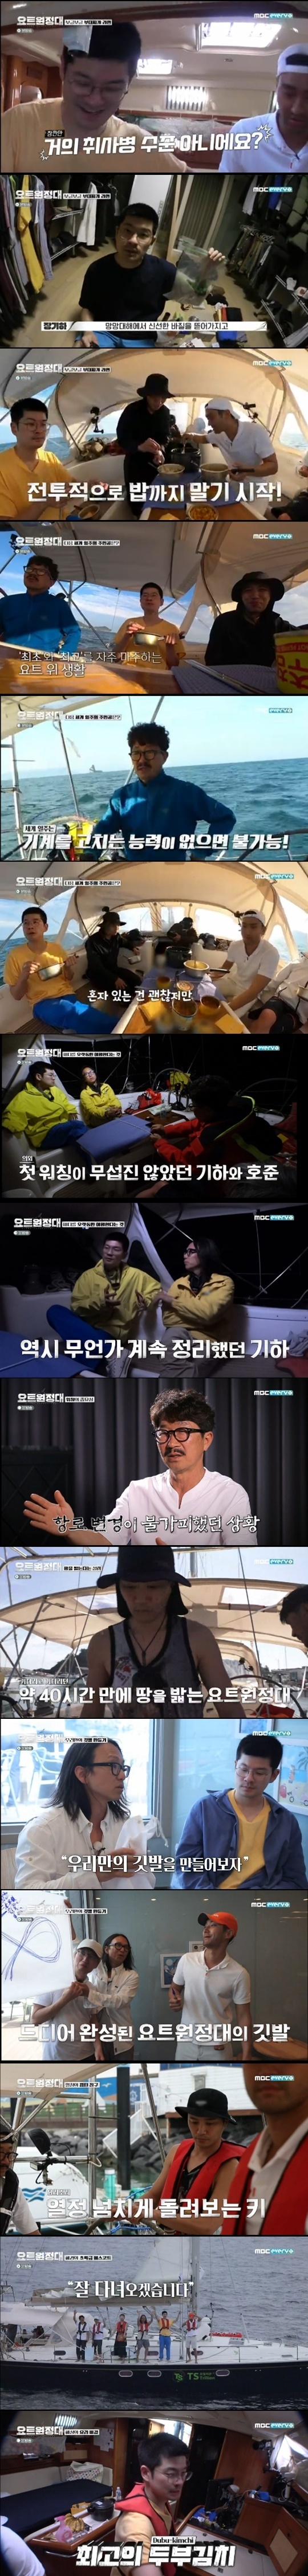 The sailing expedition took to the ground on Jeju Island and began its full-fledged Pacific Ocean voyage.MbCs Yacht Expedition, which aired on August 31, depicted the challenges of jin Goo, Choi Siwon, Chang Kiha, and Song Ho-jun on the Pacific Ocean voyage.Chang Kiha and Choi Siwon, who struggled with motion sickness after embarking on a full-scale voyage, started cooking ramen on a shaky boat.  Chang Kiha showed a passion for cooking, bringing vegetables such as basil.  Chang Kiha said at the time of his pack, I read the Captains book and he raised vegetables such as basil on the yacht.  I thought it would be so exciting to grow fresh vegetables in the ruined city.After overcoming motion sickness, Choi Siwon and his big brother Jin Goo enjoyed a storm yaby with cheddar cheese.  Captain Kim praised the crew for adapting too well, and the members were pretensioned to try a solo, non-motorized world trip.  The captain is familiar with the machine, said Song Ho-jun, who is familiar with the machine, and he needs to know the machine well because it is a good failure.  It should also be ok to be alone.  Chang Kiha lamented, Im okay with being alone, but I dont know the machine.The members shared their thoughts on the night before.  Song ho-jun said, The first watching was not scary.  But i was in tears before the departure, he said.  My girlfriend was in tears when I called my parents.  Chang Kiha said, Three weeks is not that long.  But a little bit of mischief led him to clean up.  He misunderstood people who were not good friends.  I was cheated.  In response, Captain Kim Seung-jin explained, I feel like Ive made a step in my life like Ive been in the military.Choi Siwon, who was guarding the yacht at dawn, was confronted by strong lights in the calm, comfy waters.  It was a large fishing boat that was getting closer and closer to the lights.  Choi Siwon woke up Captain Kim, and he changed the course.  Choi Siwon said, I was really nervous.  At one point, the boat was in front of him, and he confessed, The night sea seems more unpredictable than I thought.The Sailing Expedition arrived on Jeju Island within 40 hours of leaving the islands and attempted to enter.  The crew succeeded in the arrangement, performing their respective duties, such as installing fender and cleaning up ropes, as directed by Captain Kim.  However, due to a twist in the mast rope, it was delayed for two hours to refurbish.As an installer, song ho-jun, his eldest brother, came up with the idea of make our own flag.  Choi Siwon, Kims moustache, and Chang Kiha came up with the idea of a knot.  Song ho-jun said that the knot is good, meaning that they connect with each other.  Chang Kiha said, I came up with an idea.  As an artist, I thought that creativity was not dead yet.The yacht had been refurbished, and the crew was preparing to leave The Port of Dodo and leave for the Pacific Ocean.  Then Jin Goo played an important role in holding the yacht keys.  Jin Goo managed to escape the breakwater safely.Chang Kiha and Choi Siwon once again worked as culinary duos.  Chang Kiha decided to make tofu kimchi because he was wondering what kind of food he would give the crew.  Choi Siwon helped Chang Kiha as a culinary assistant.  The crew who tasted Chang Kihas tofu kimchi praised it as fantastic taste